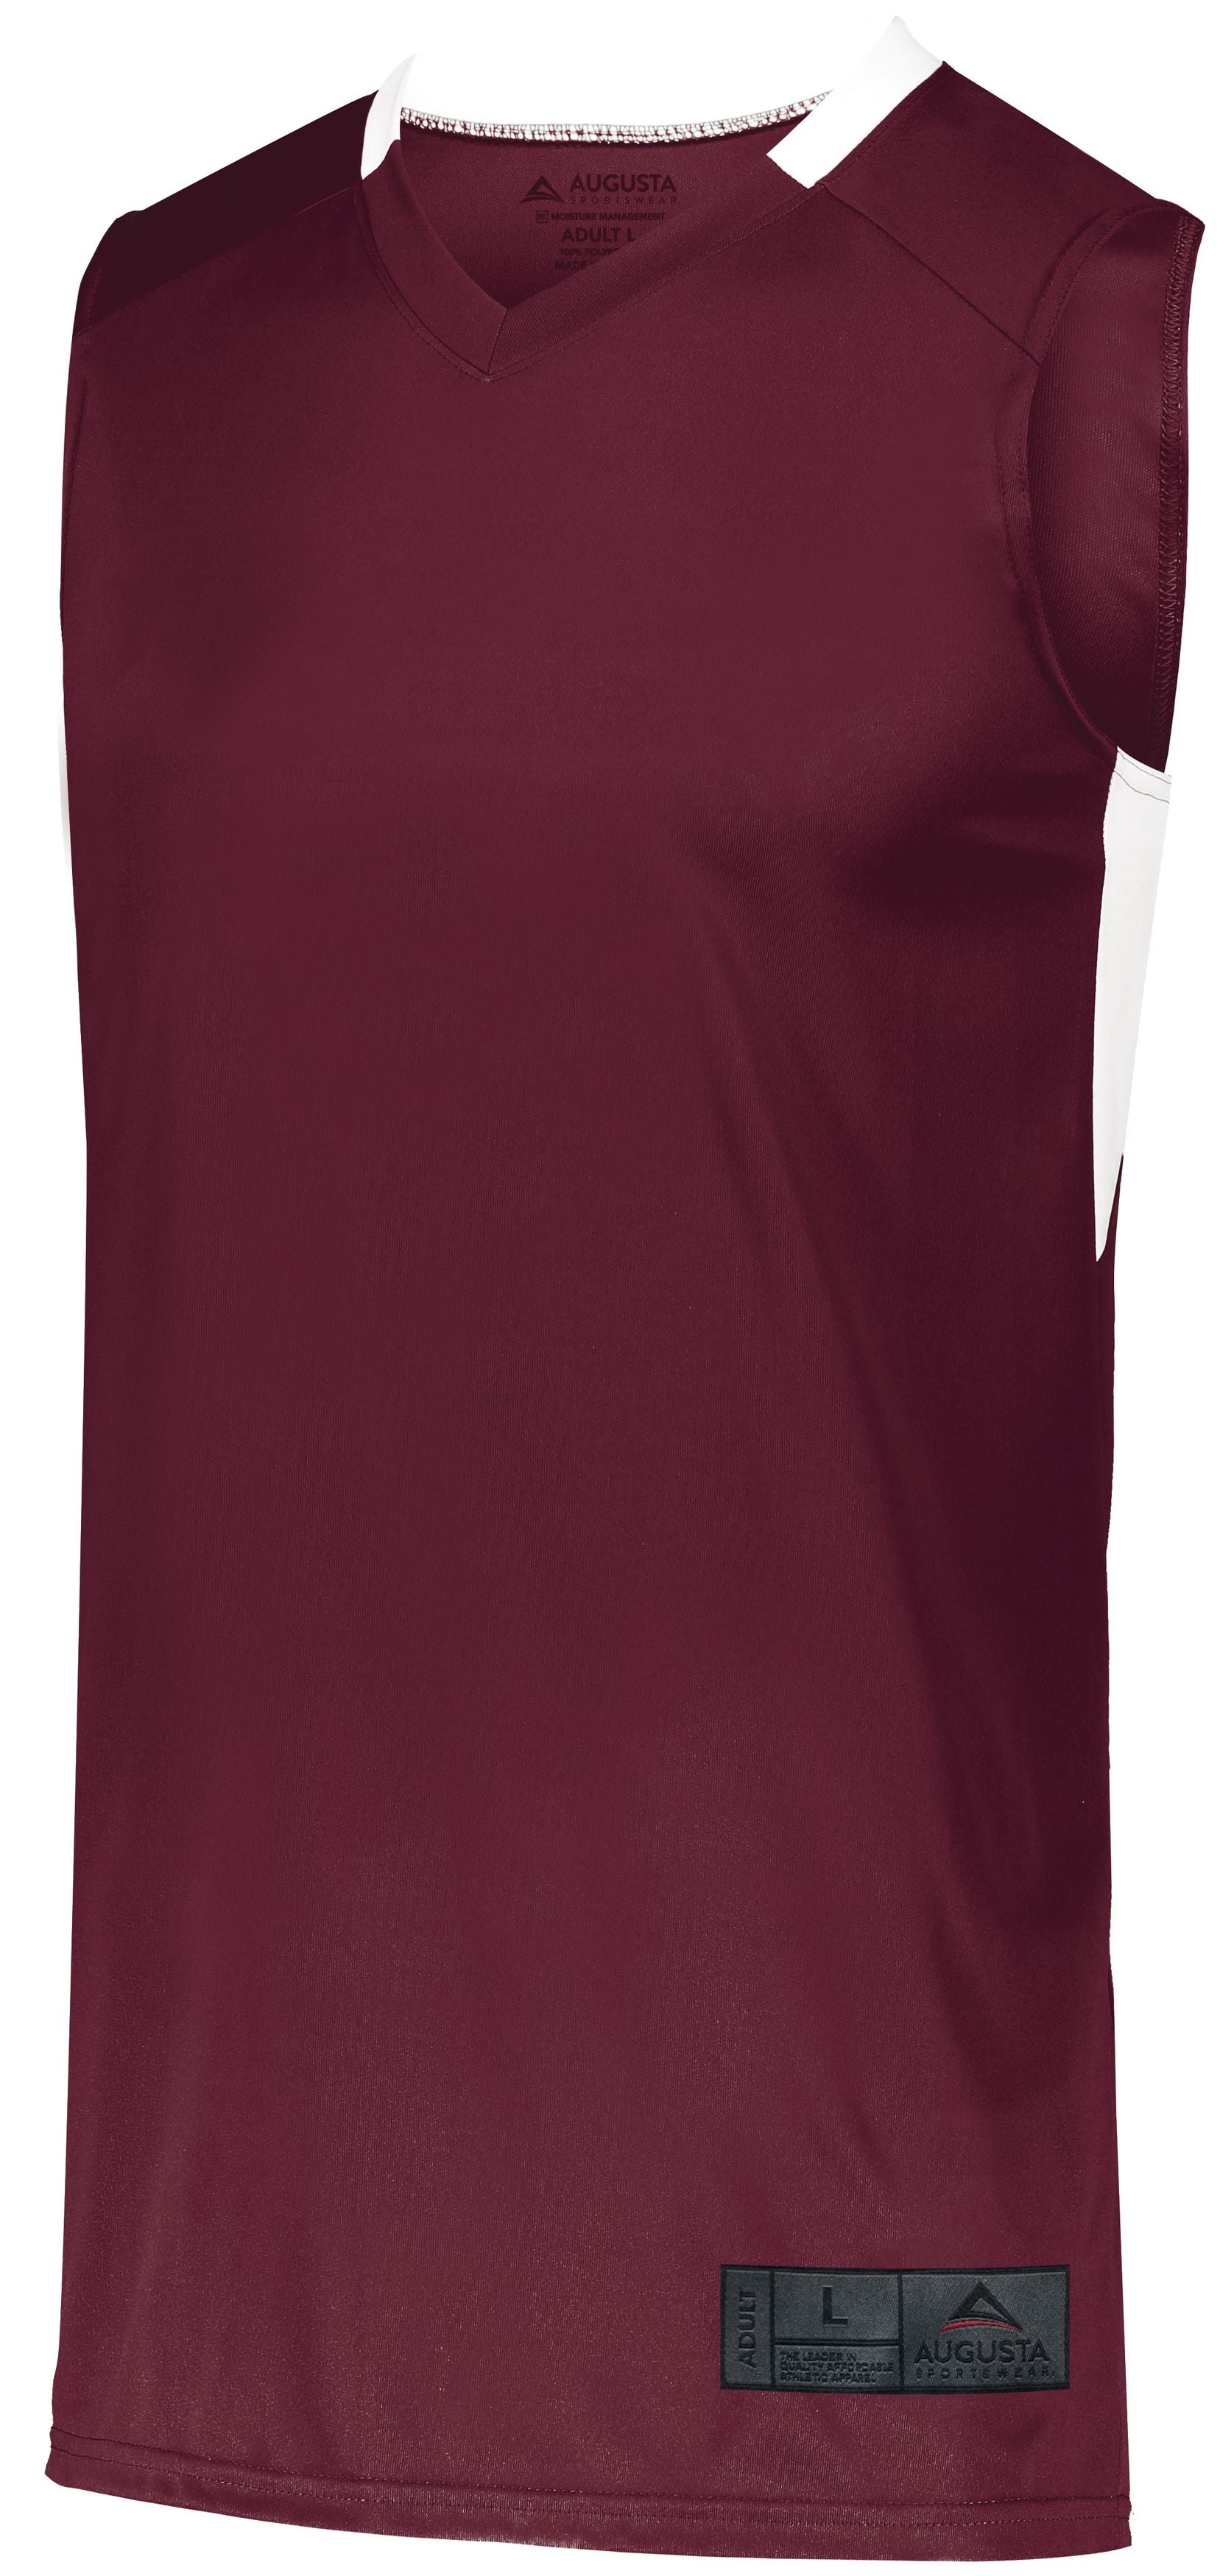 Augusta Sportswear Step-Back Basketball Jersey in Maroon/White  -Part of the Adult, Adult-Jersey, Augusta-Products, Basketball, Shirts, All-Sports, All-Sports-1 product lines at KanaleyCreations.com